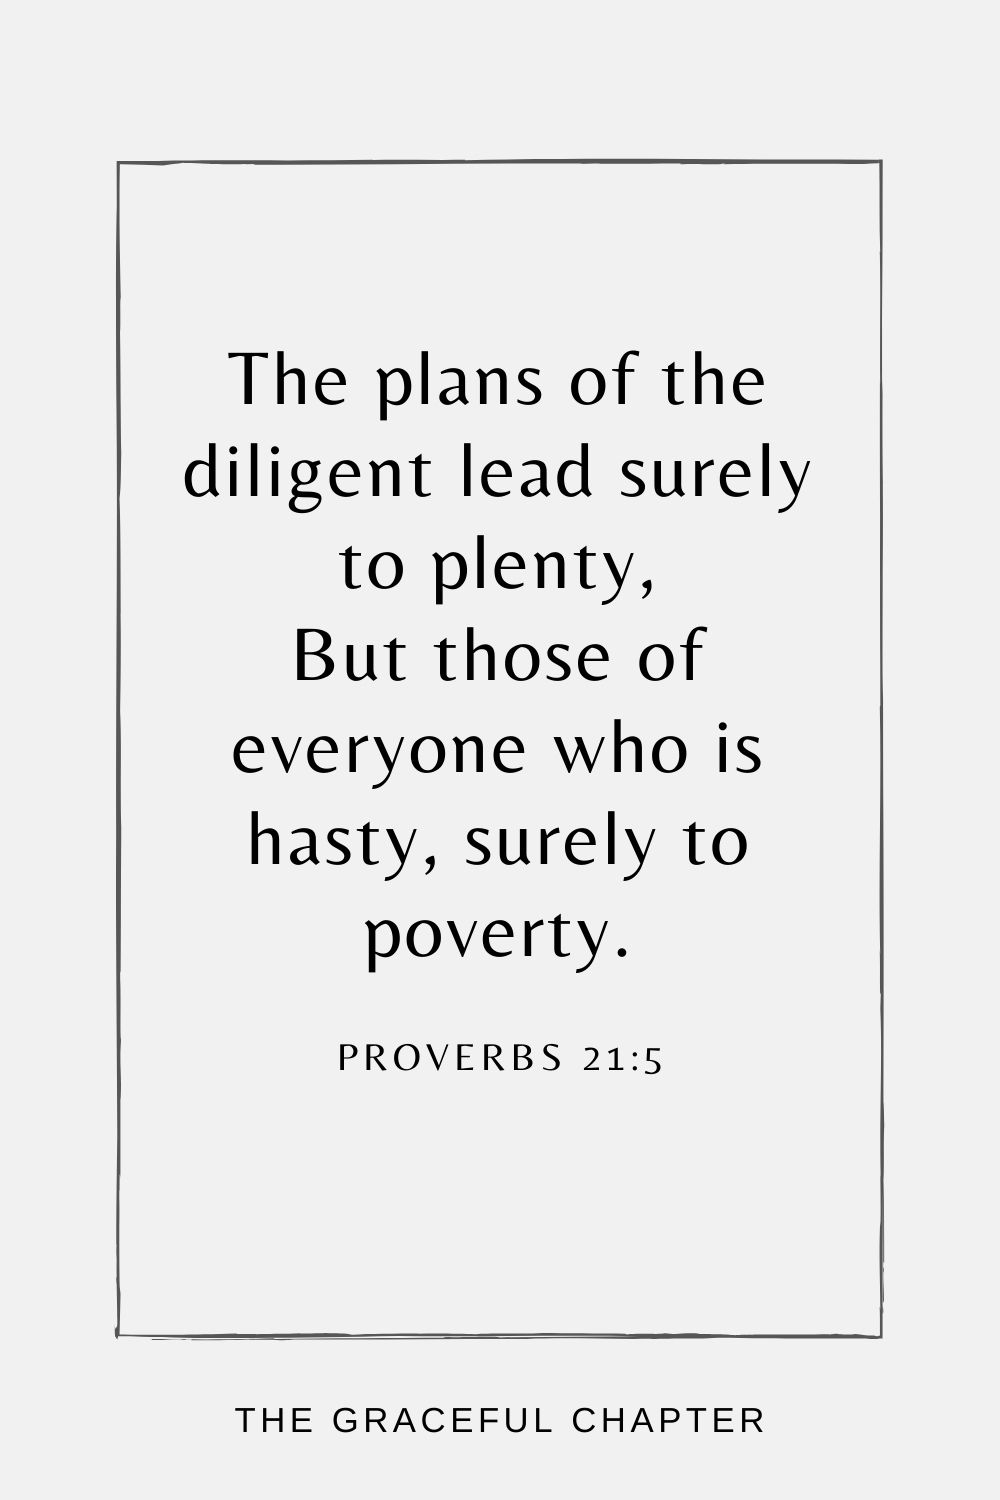 The plans of the diligent lead surely to plenty, But those of everyone who is hasty, surely to poverty. Proverbs 21:5